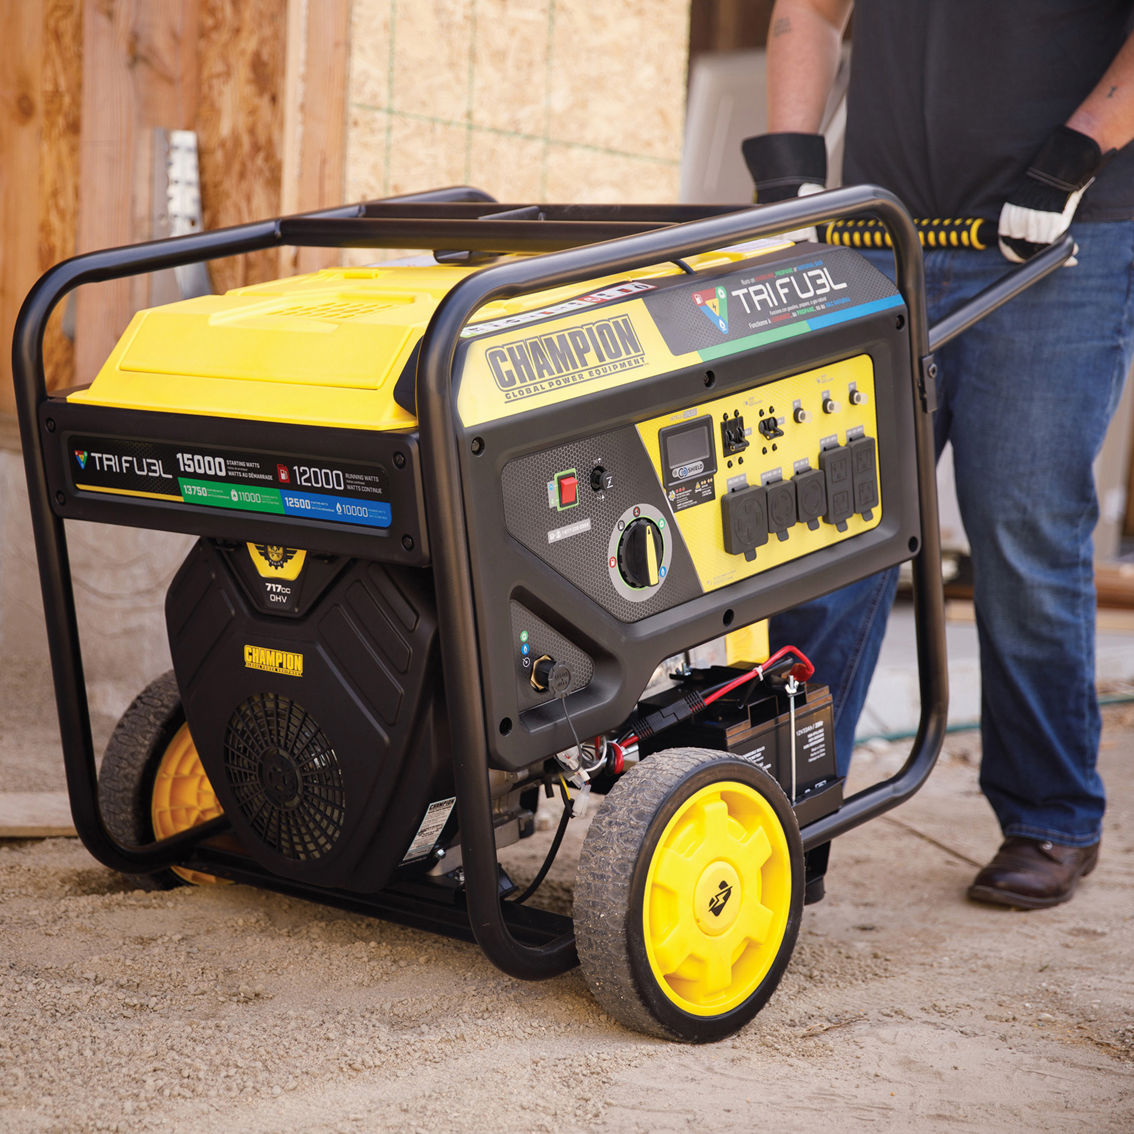 Champion 12,000W Tri Fuel Portable Generator with Electric Start and CO Shield - Image 2 of 10